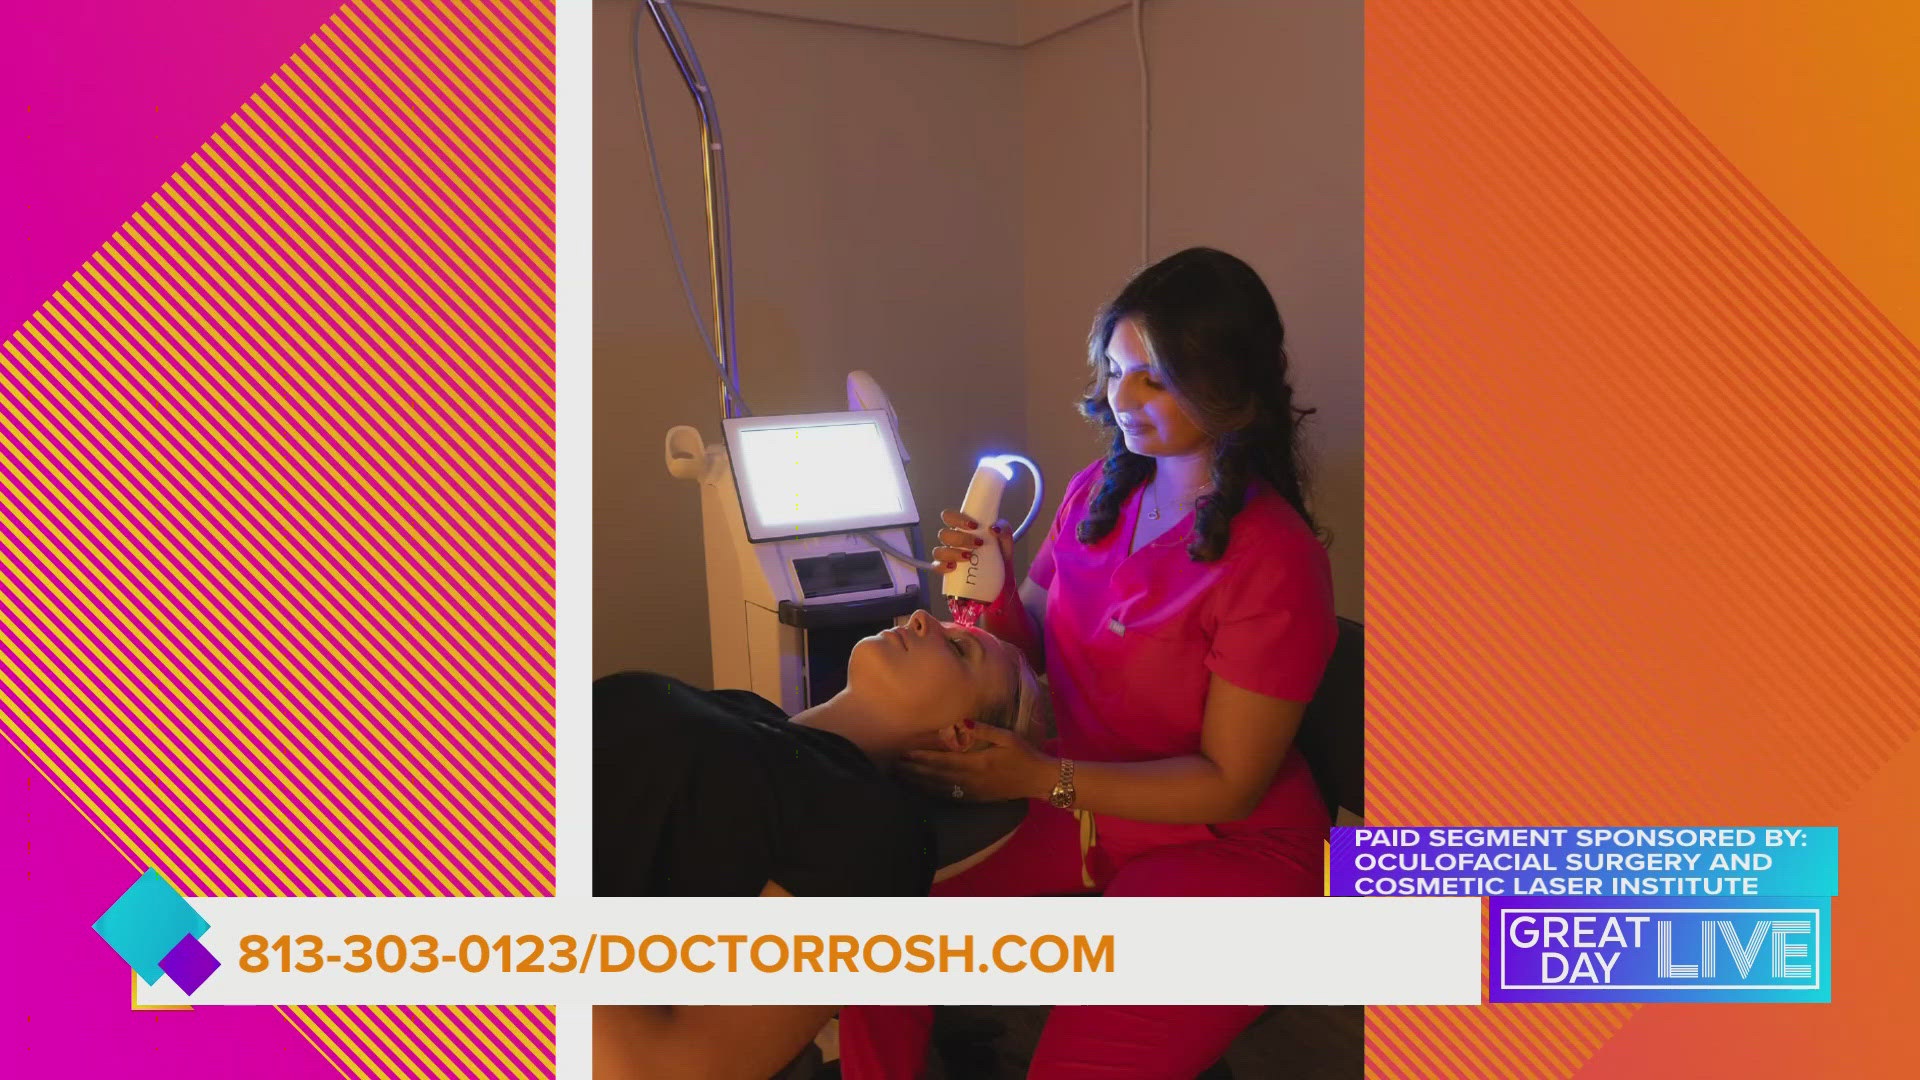 This story sponsored by: Oculofacial Surgery and Cosmetic Laser Institute. Dr. Rosh explains what laser skin resurfacing is and how it works.